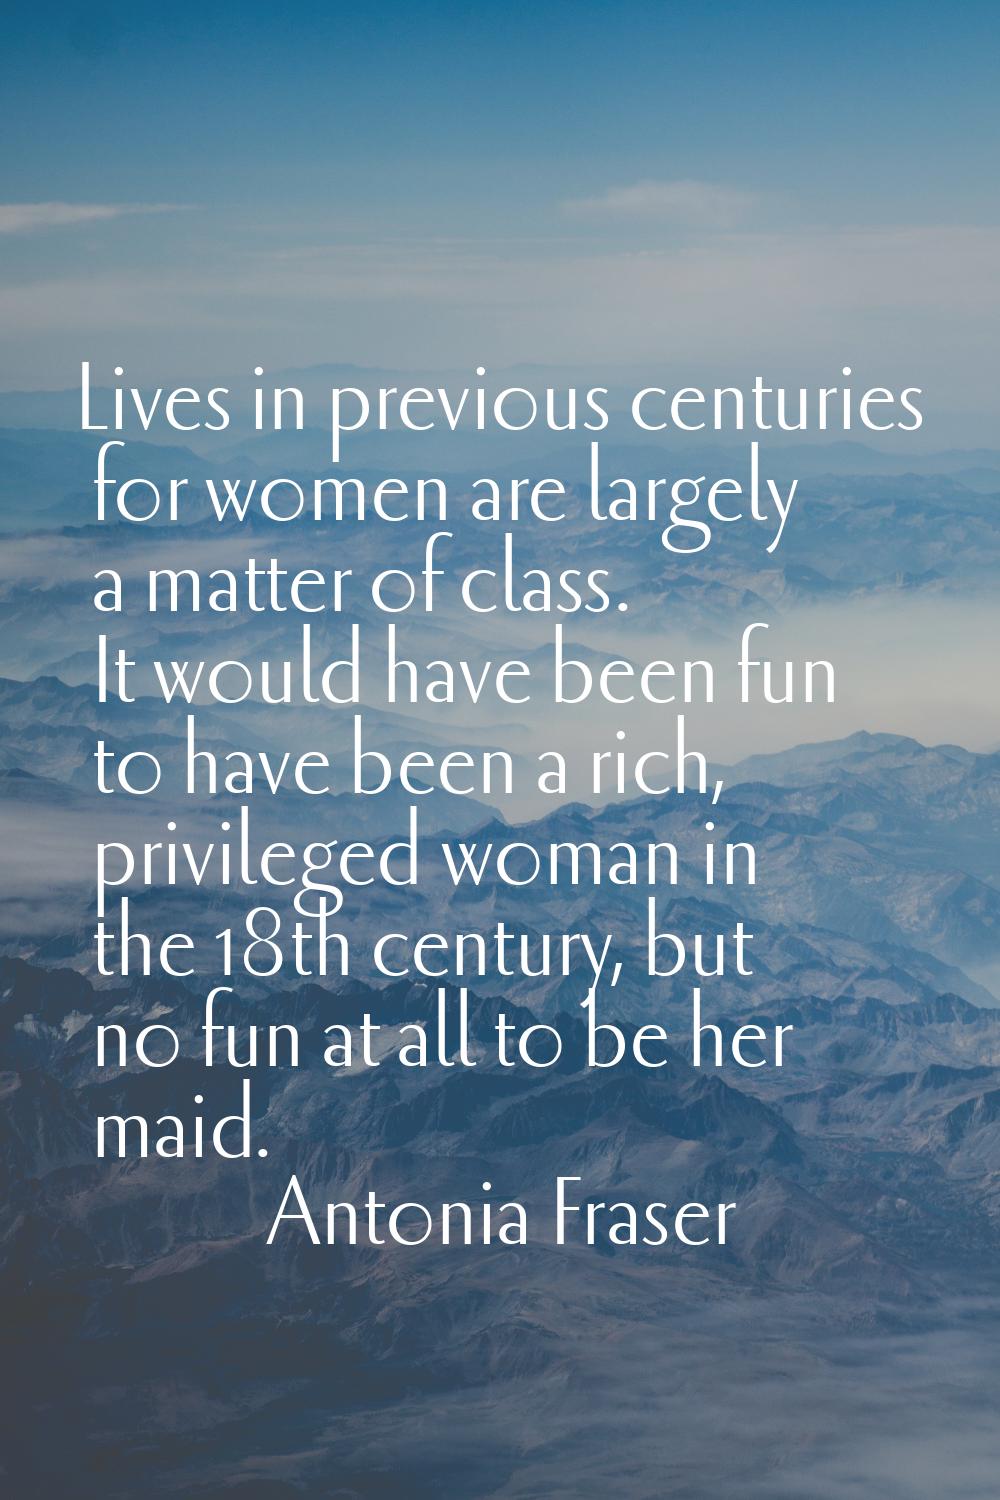 Lives in previous centuries for women are largely a matter of class. It would have been fun to have